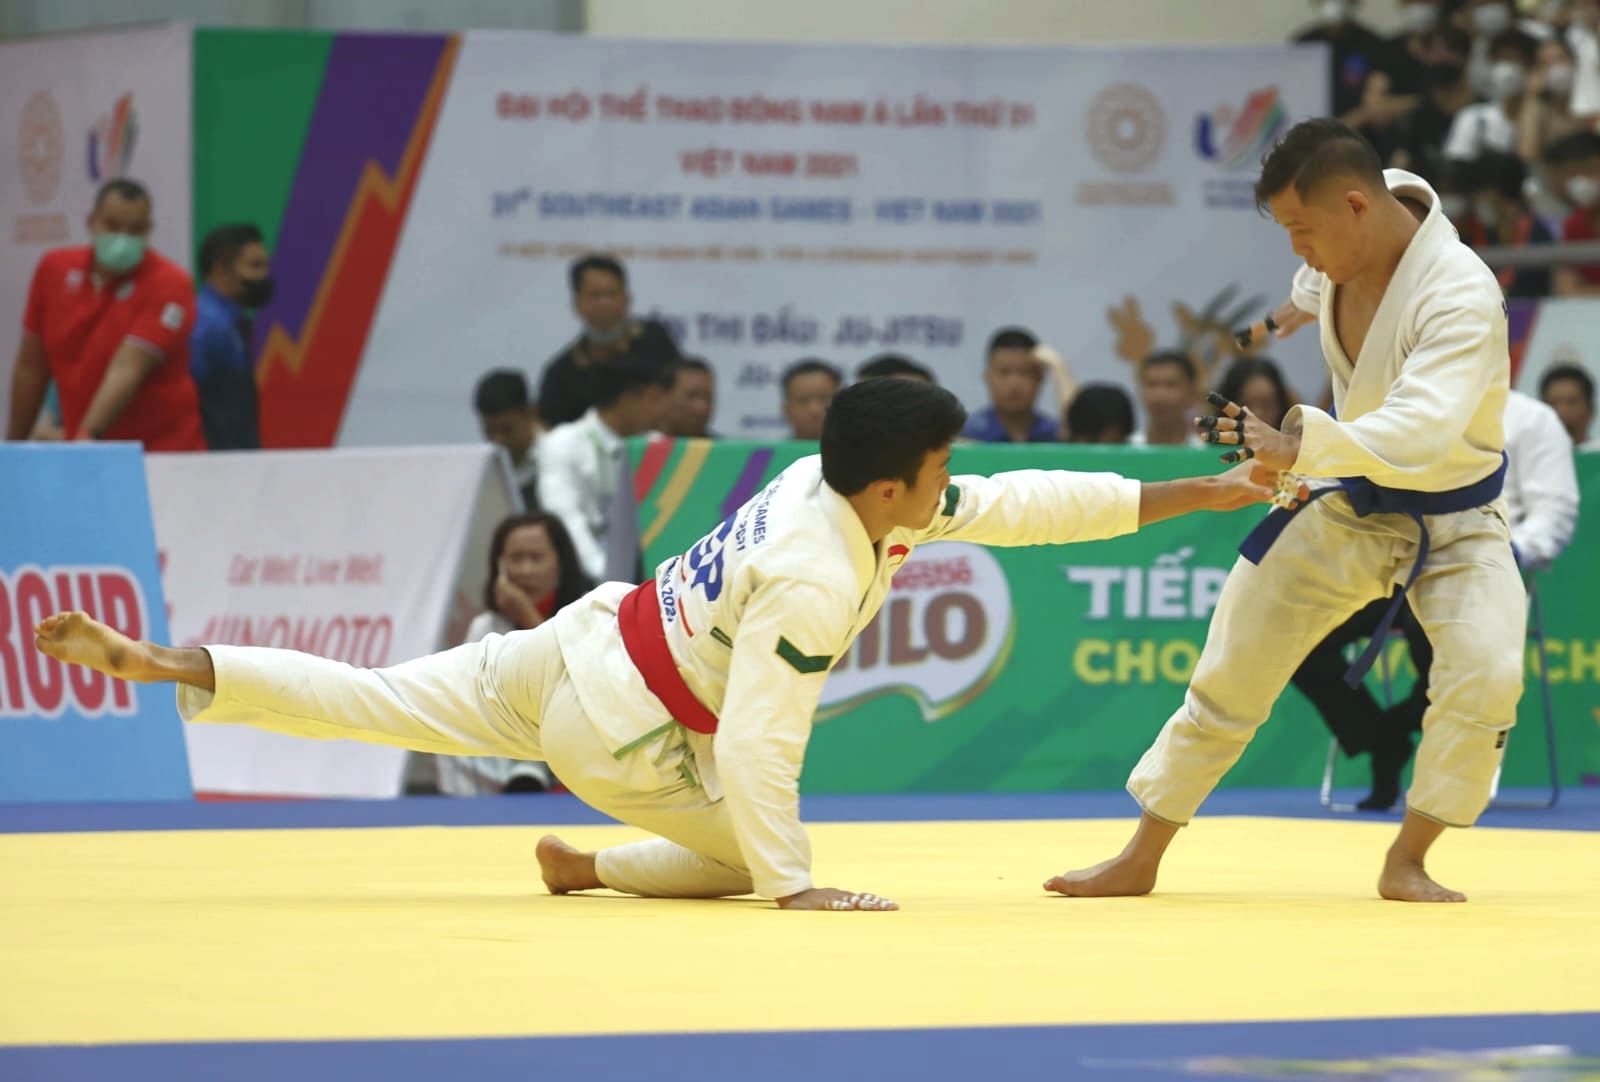 CPL (NSF) Noah (left) competing against his opponent from the Philippines